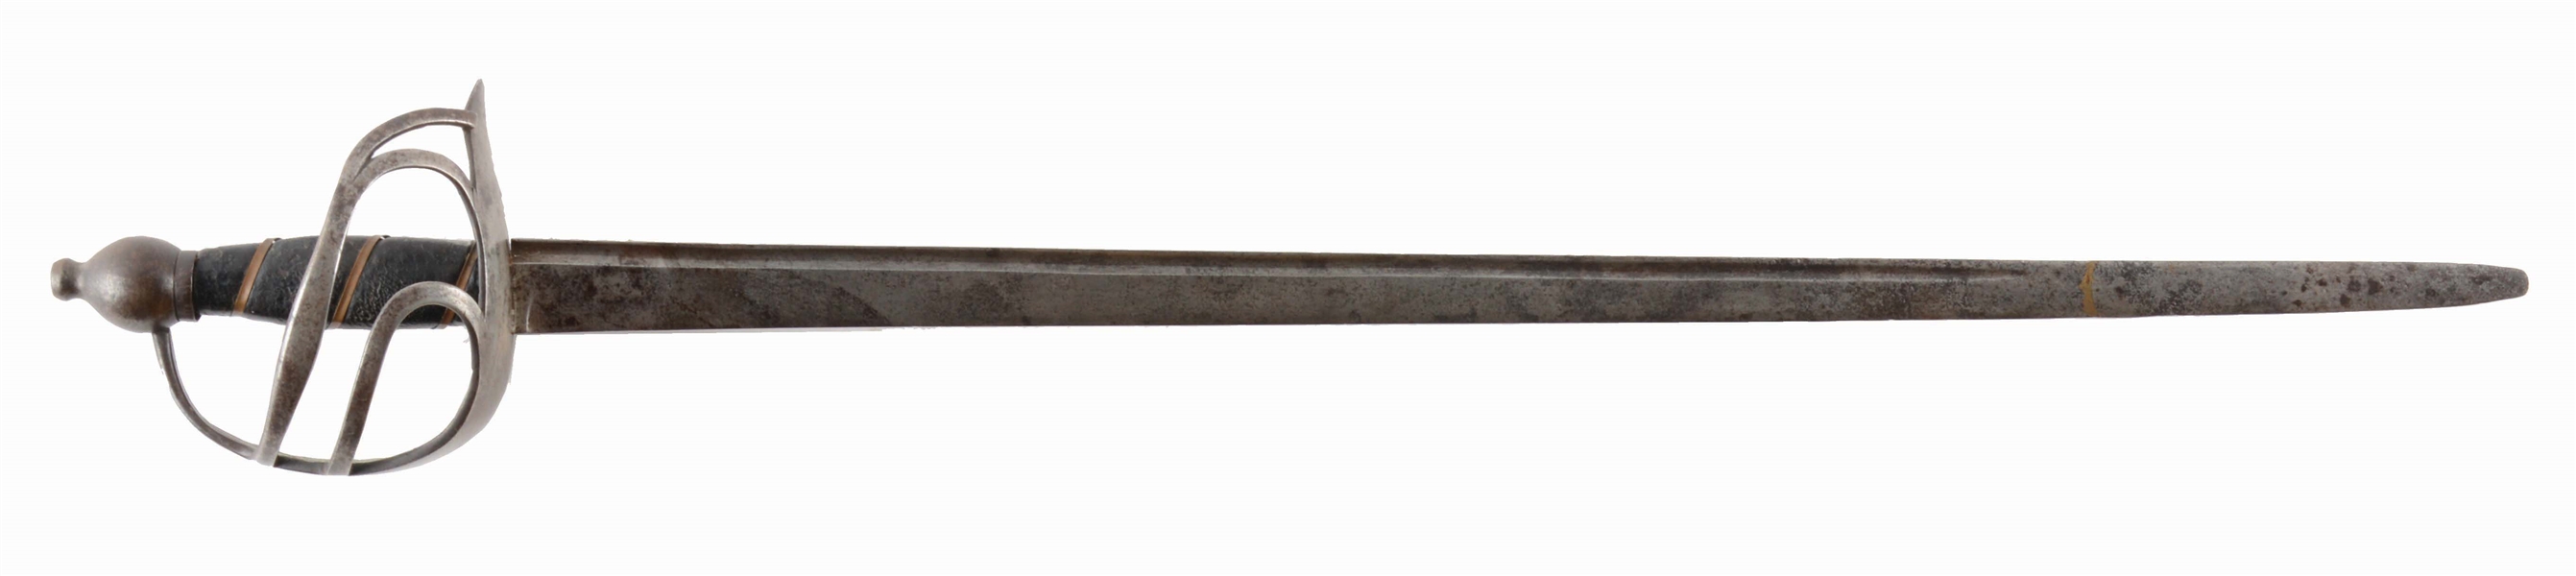 A REVOLUTIONARY WAR PERIOD AMERICAN (?) SWORD OF MILITARY TYPE WITH THREE BRANCH STEEL GUARD.